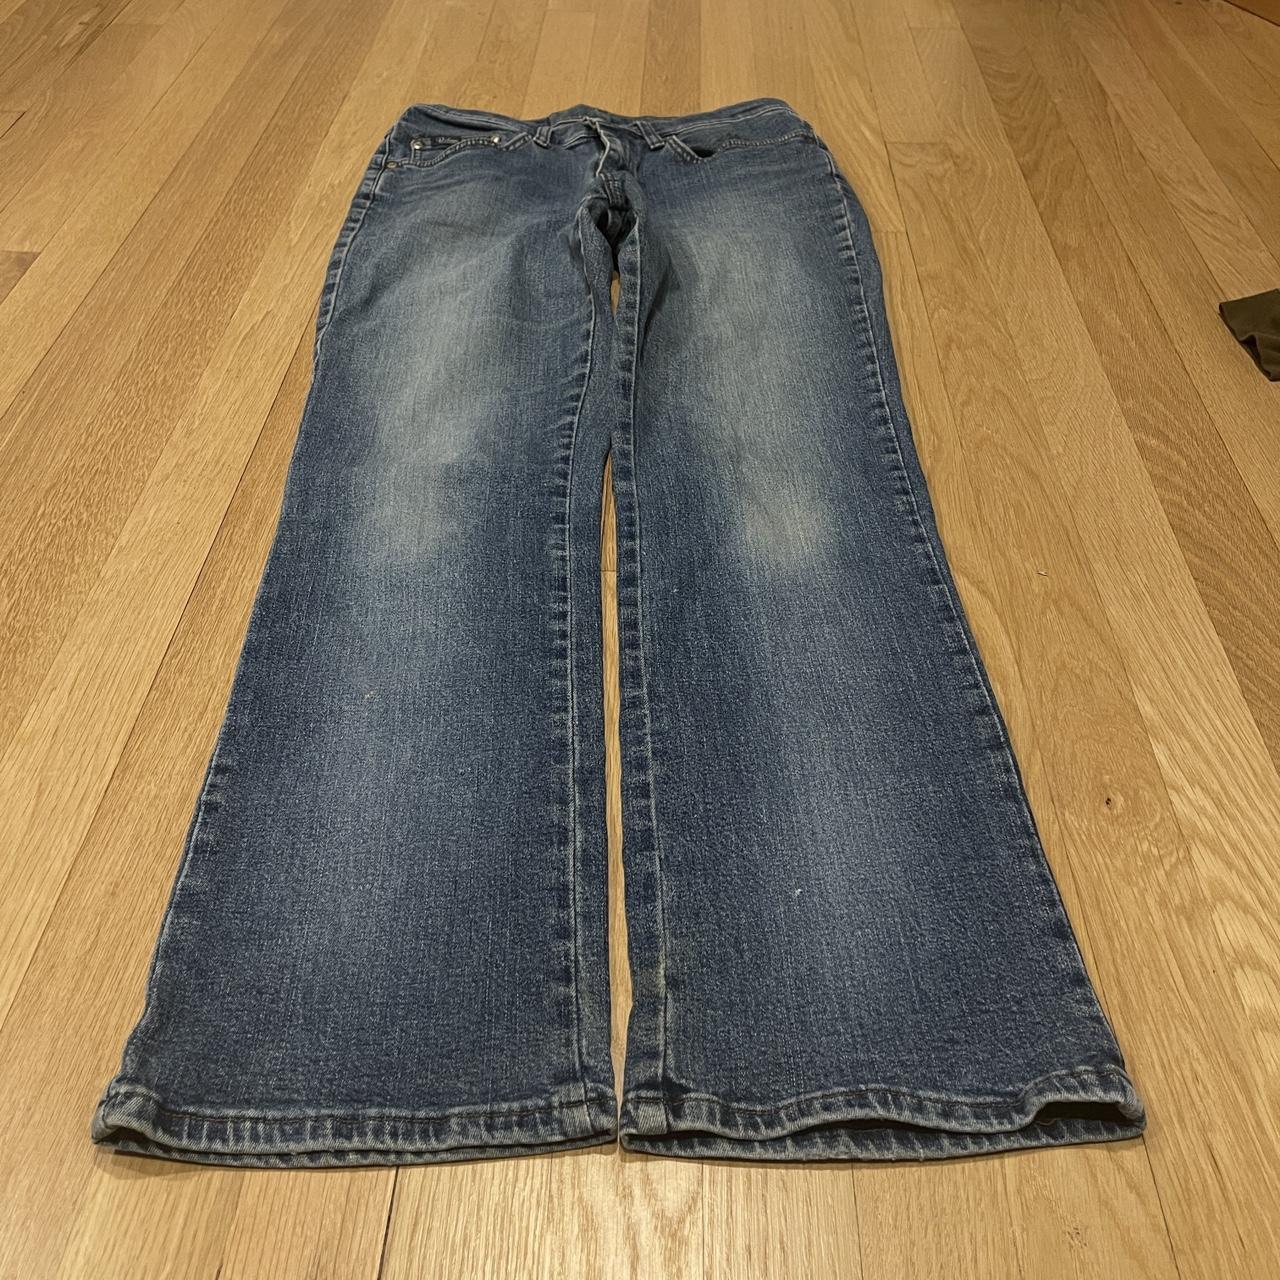 Vintage “RIDER” Baggy / Relaxed Fit Jeans Used to... - Depop